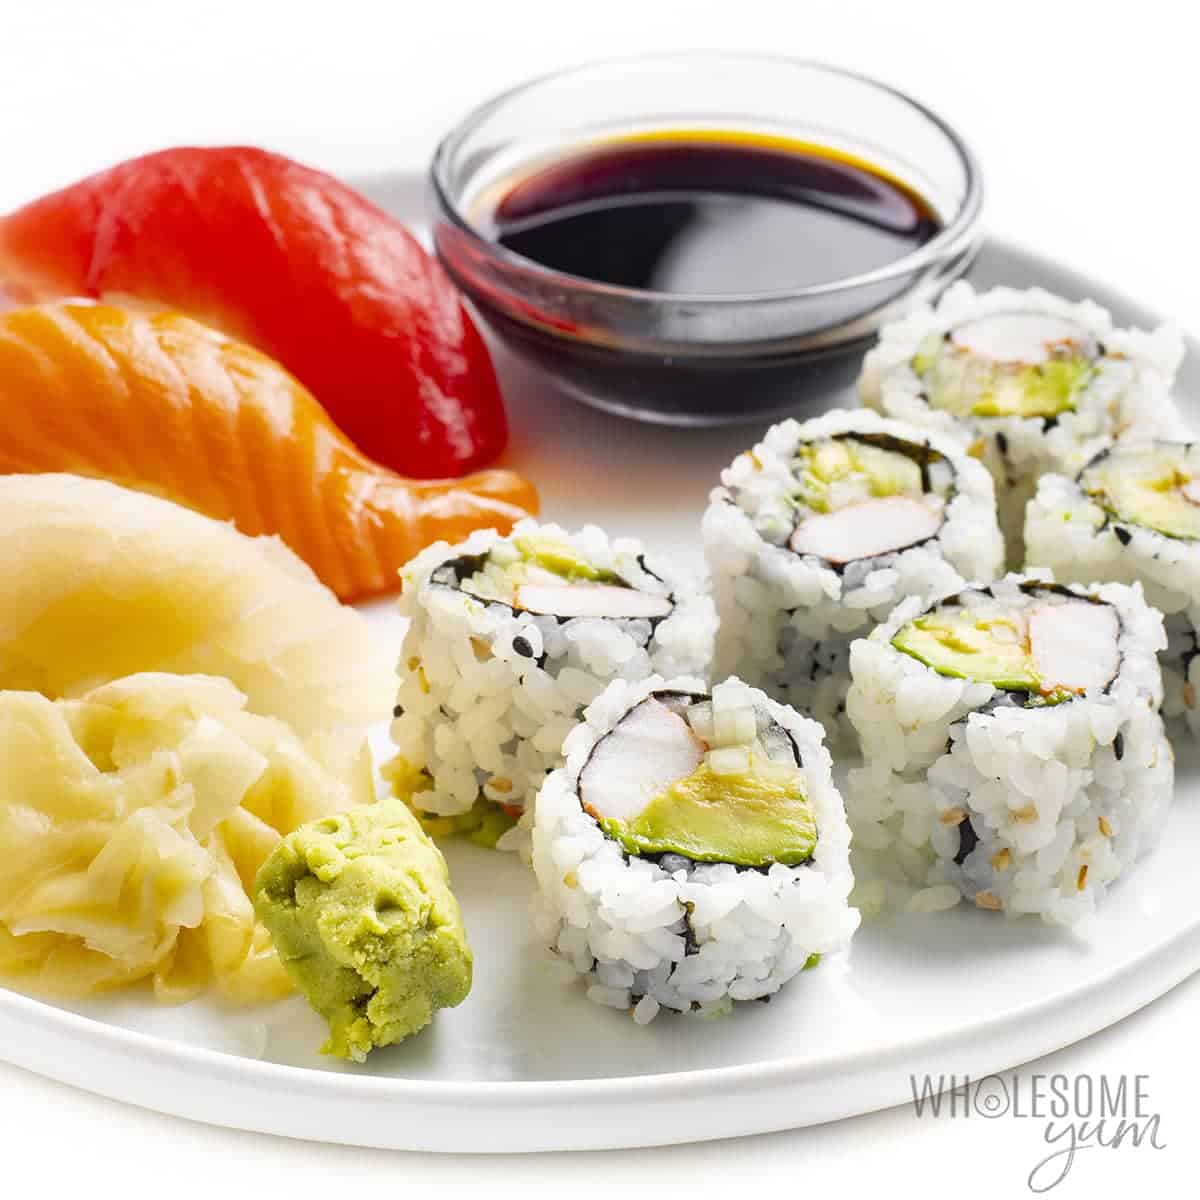 Is sushi keto? Some kinds of sushi can be keto, but this sushi with rice is too high in carbs to be keto friendly.